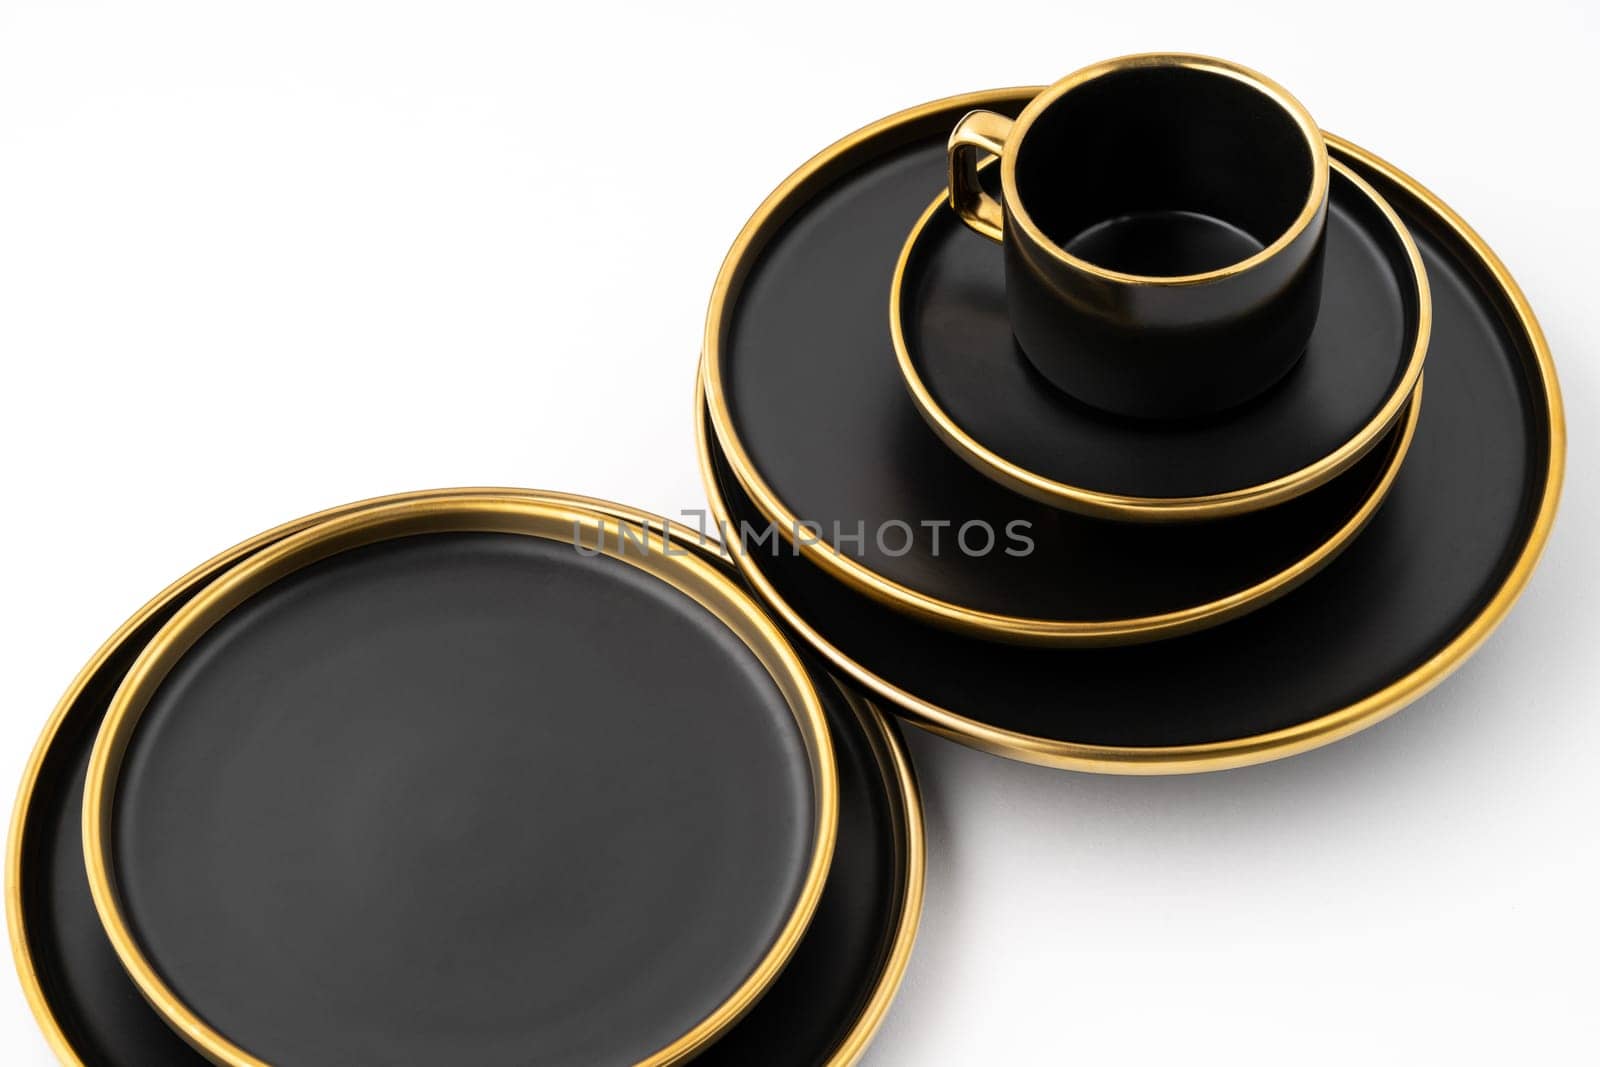 A set of black and golden ceramic plates and cup on a white background